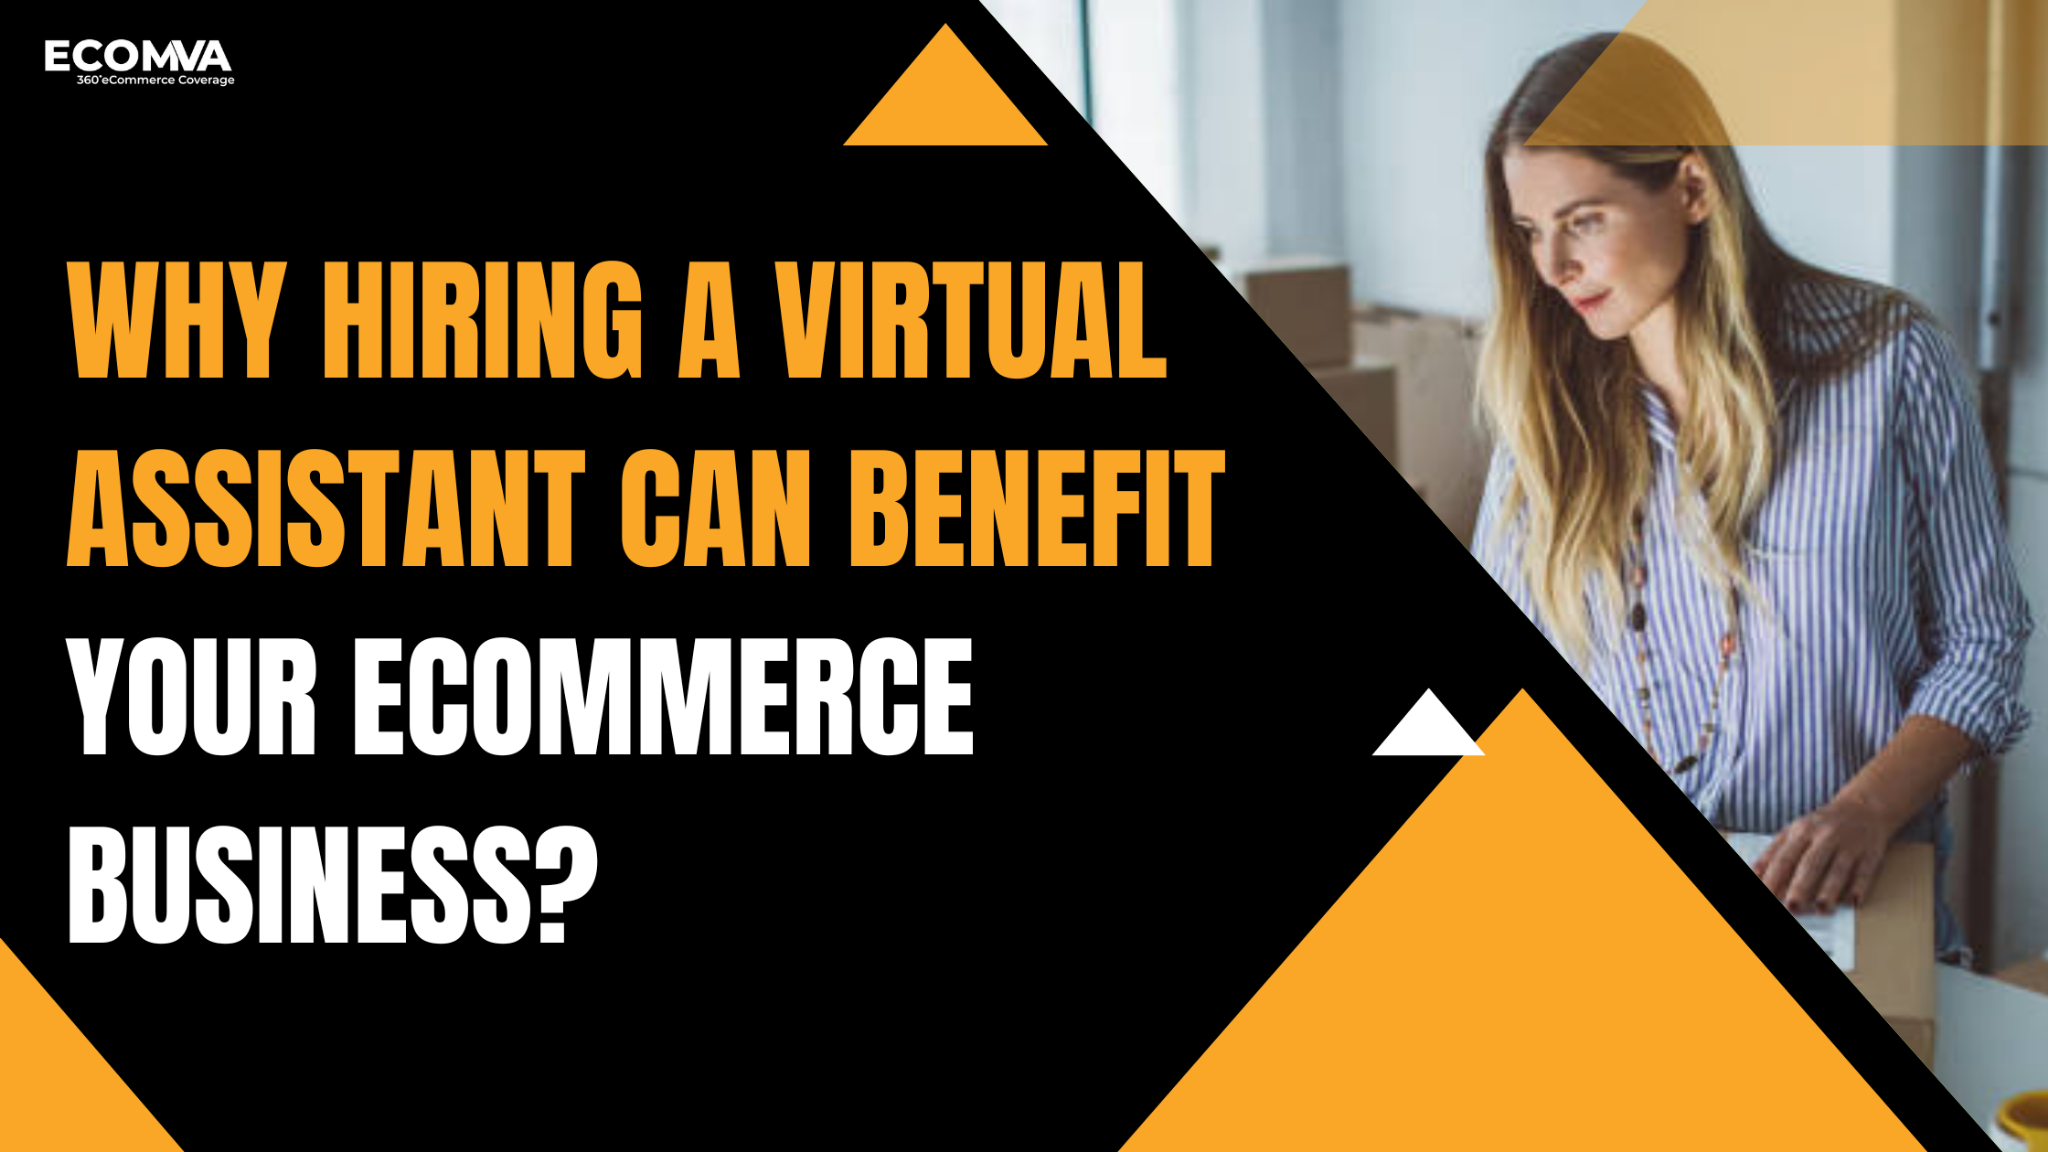 Why Hiring a Virtual Assistant Can Benefit Your e-Commerce Business?